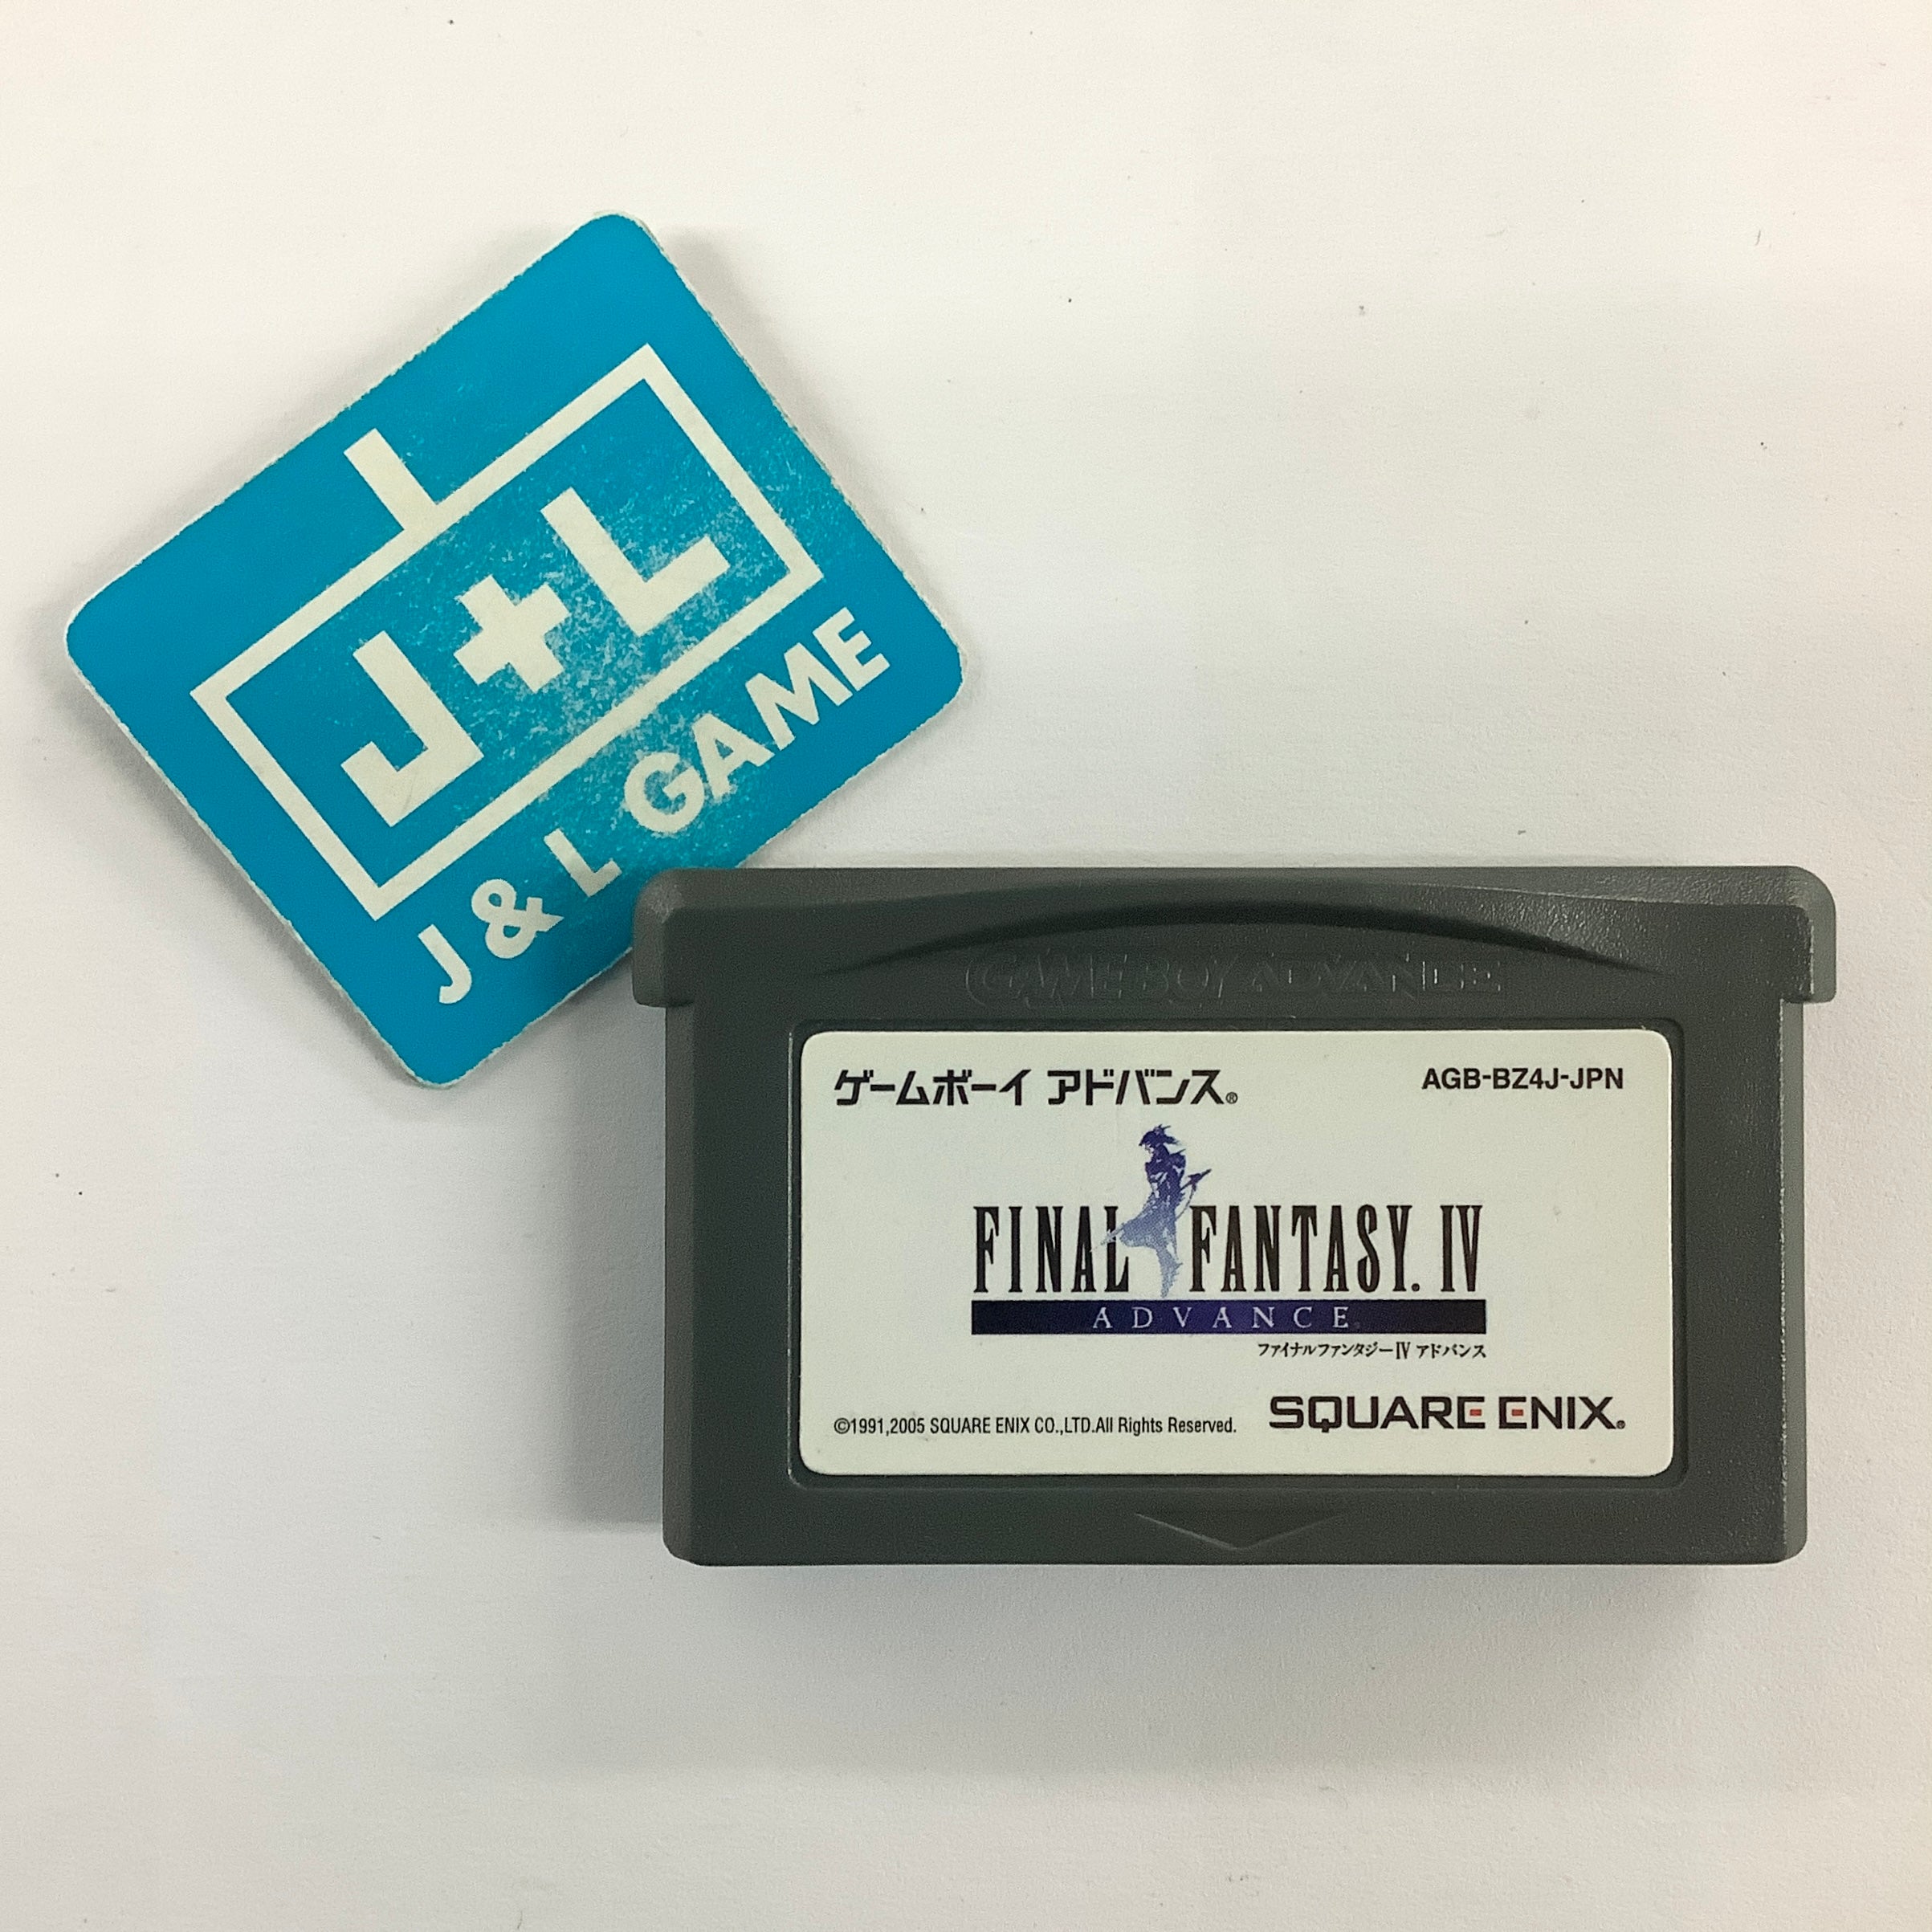 Final Fantasy IV Advance - (GBA) Game Boy Advance [Pre-Owned] (Japanese Import) Video Games Nintendo   